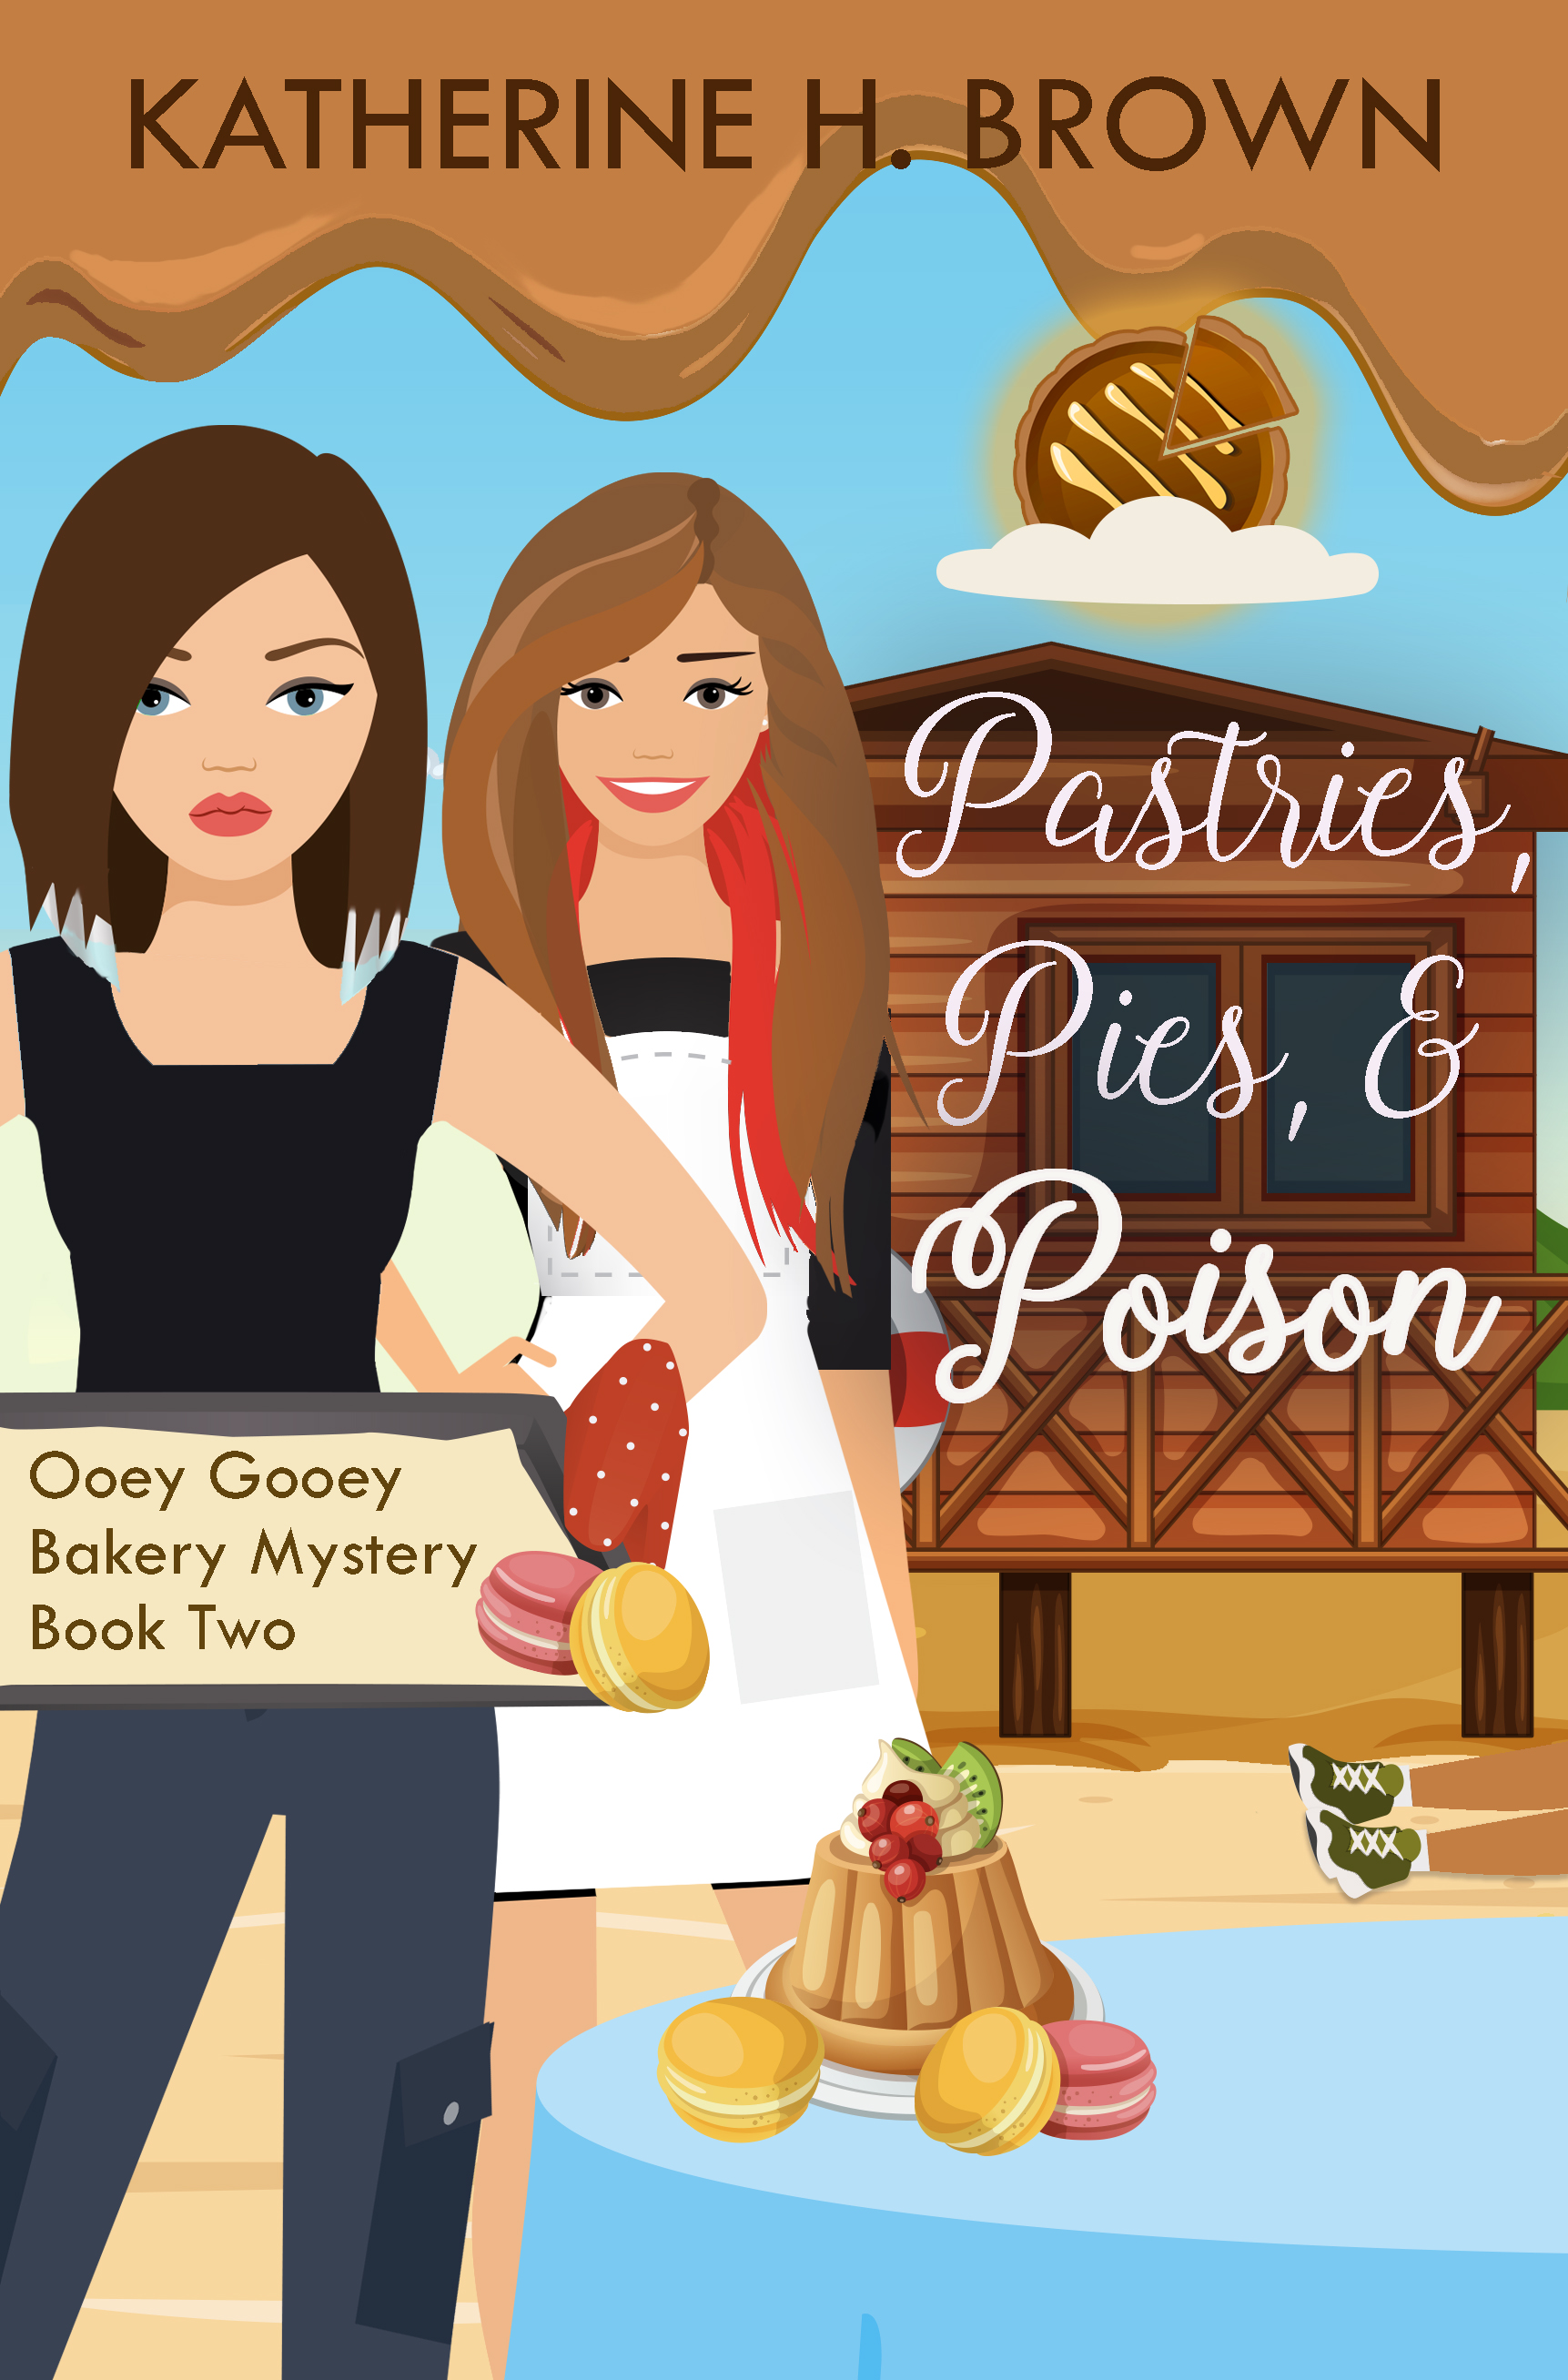 Pastries, Pies, & Poison by Katherine H Brown